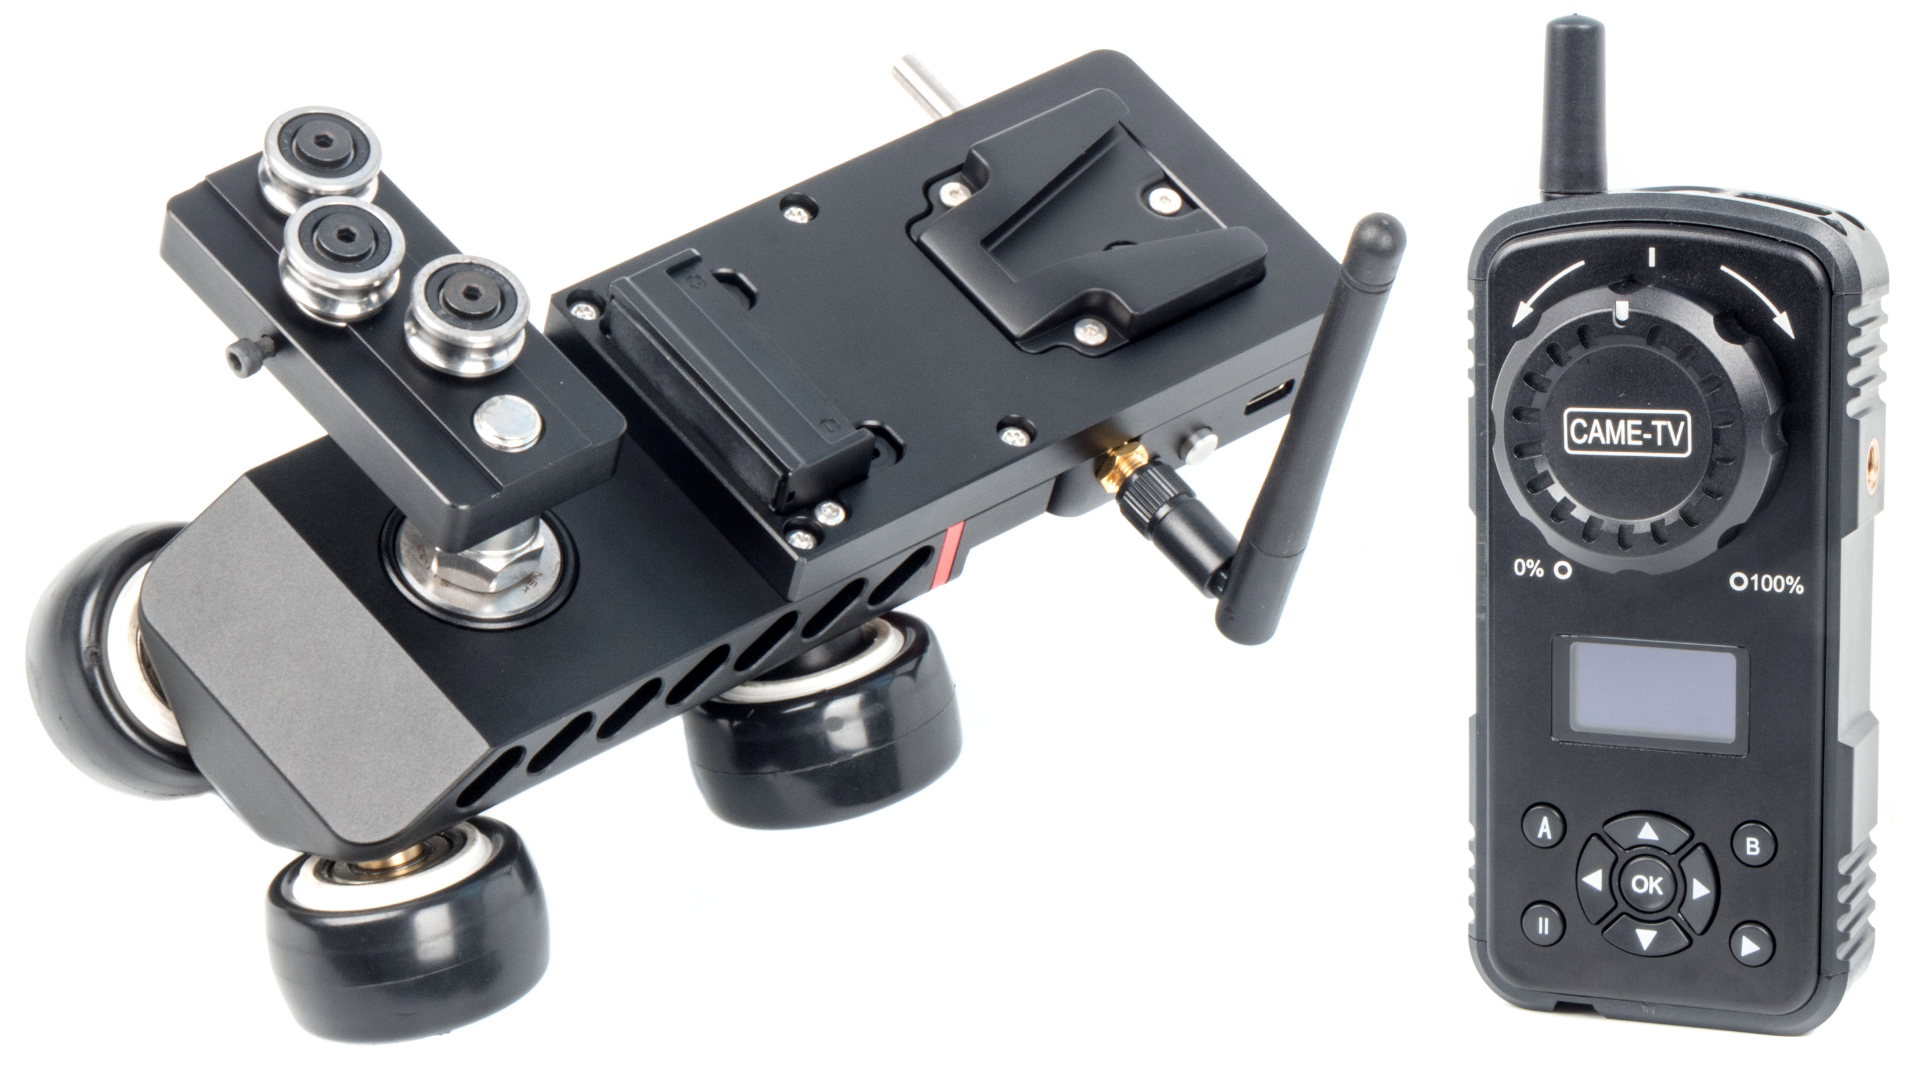 CAME-TV Motorized Wireless Track Dolly Introduced CineD